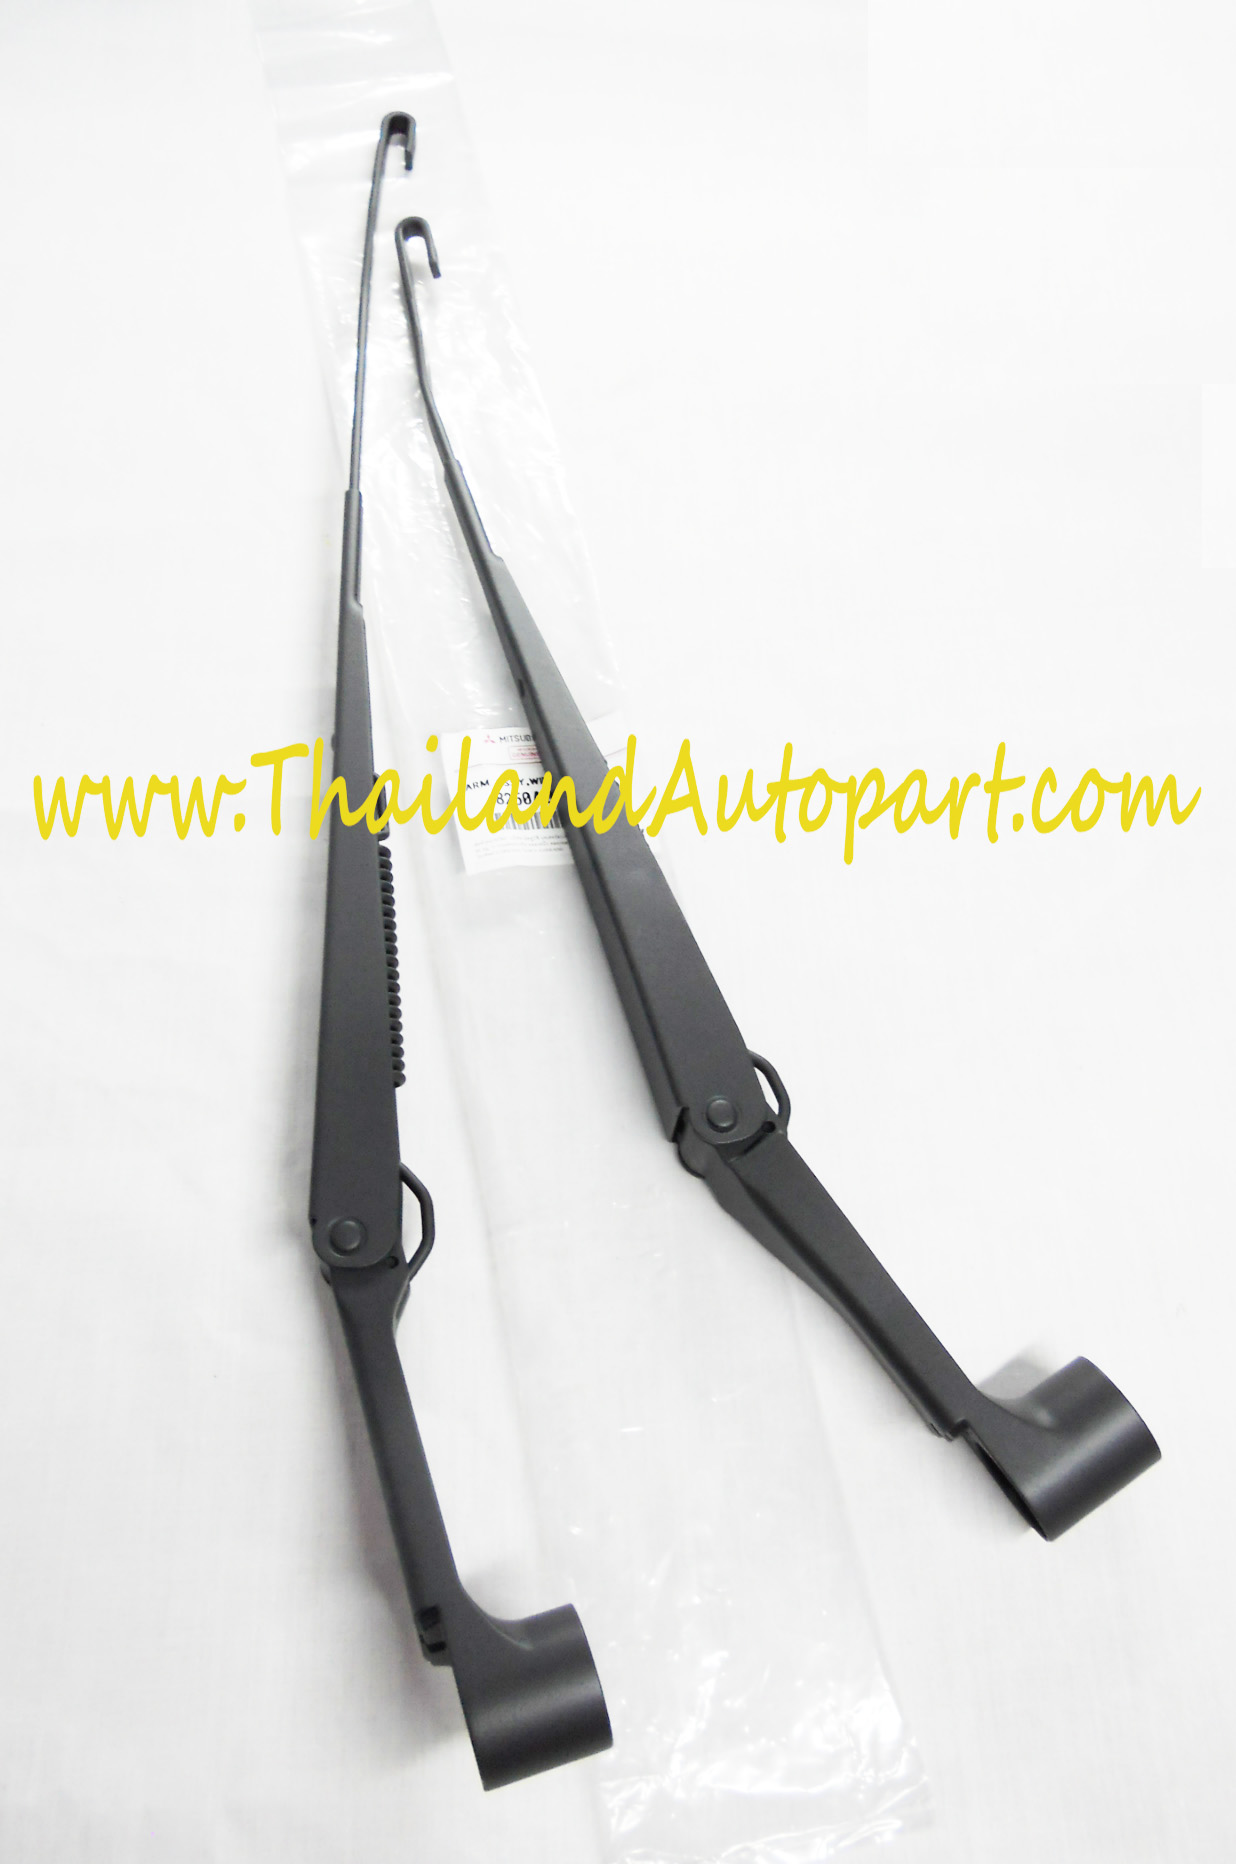 WIPER ARMS FOR MITSUBISHI CARS AND PICKUP TRUCKS